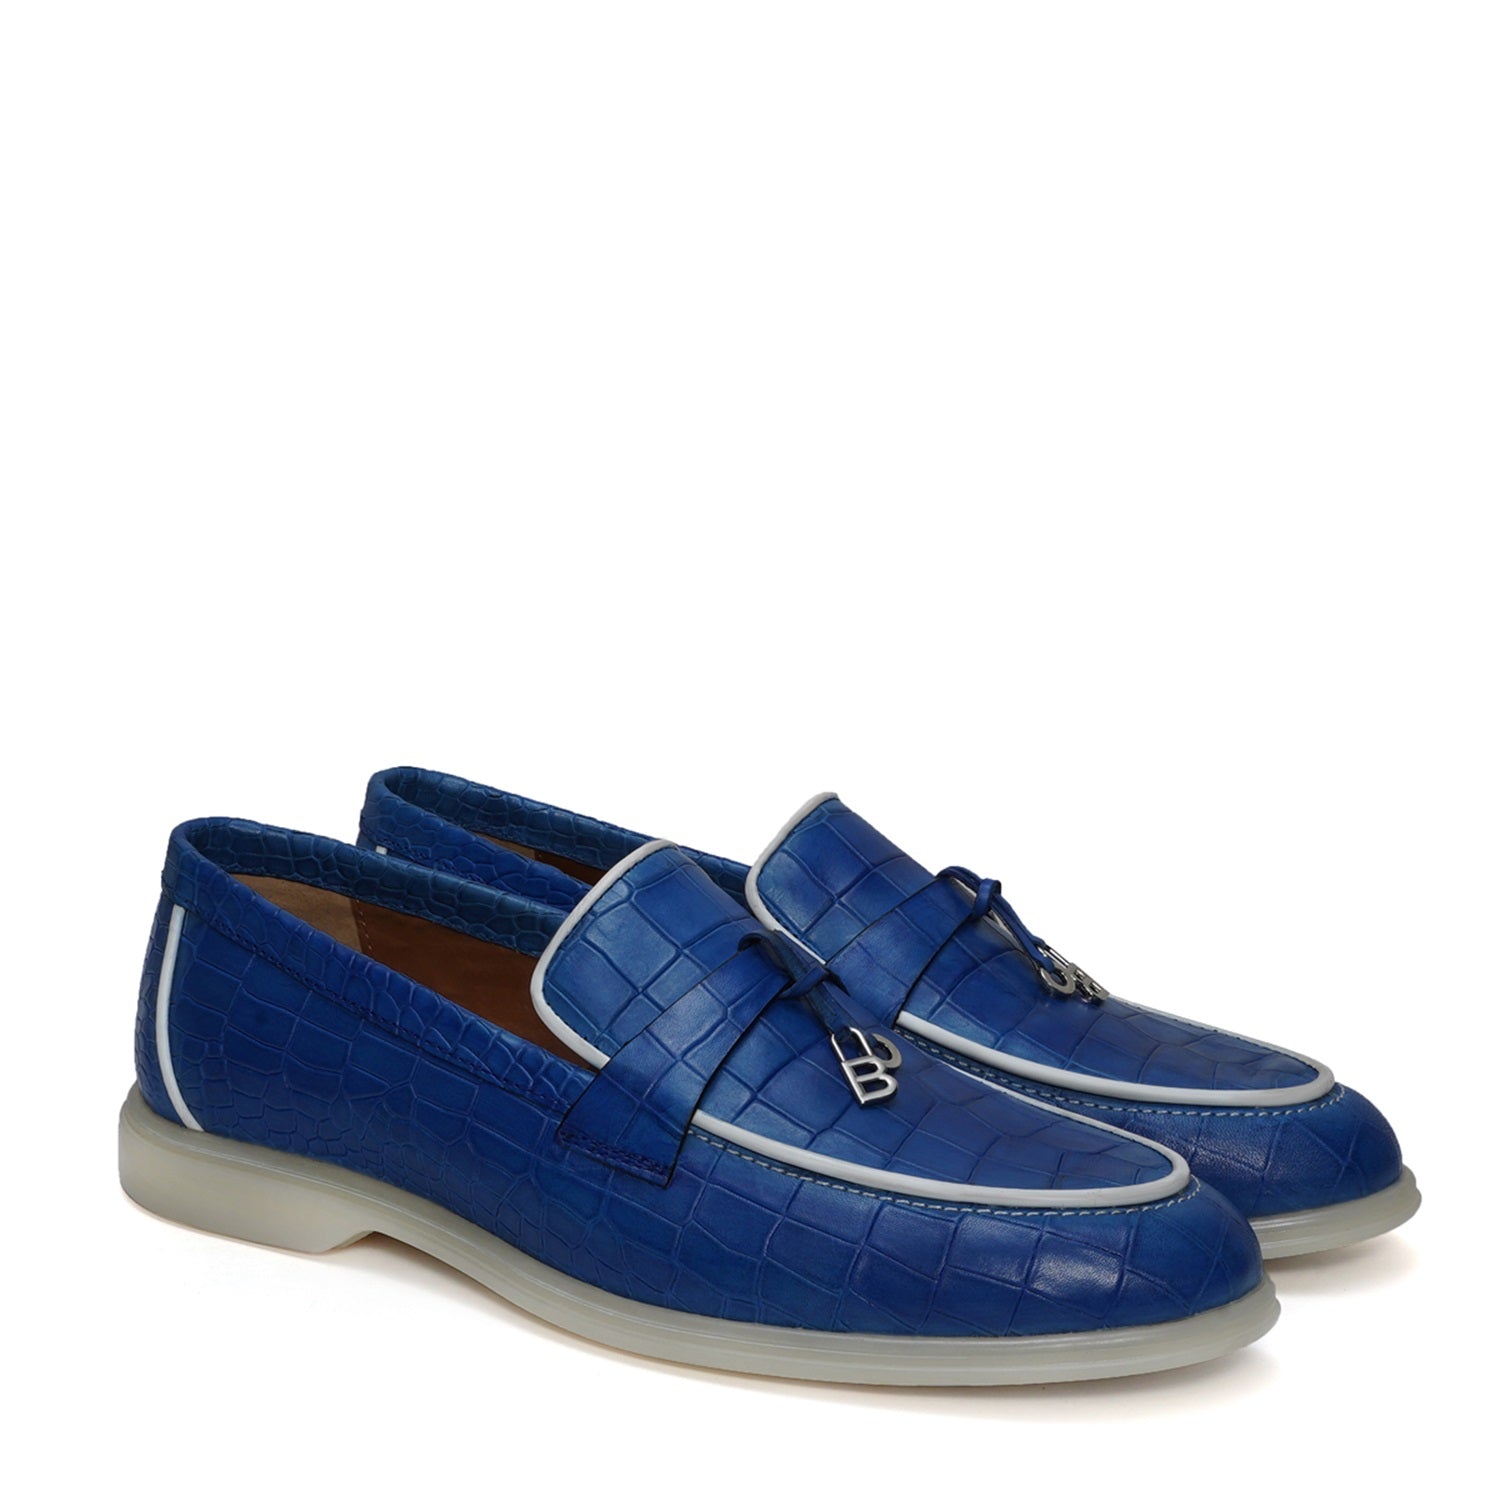 Blue Deep Cut Yacht Loafer With Light Weight Sole